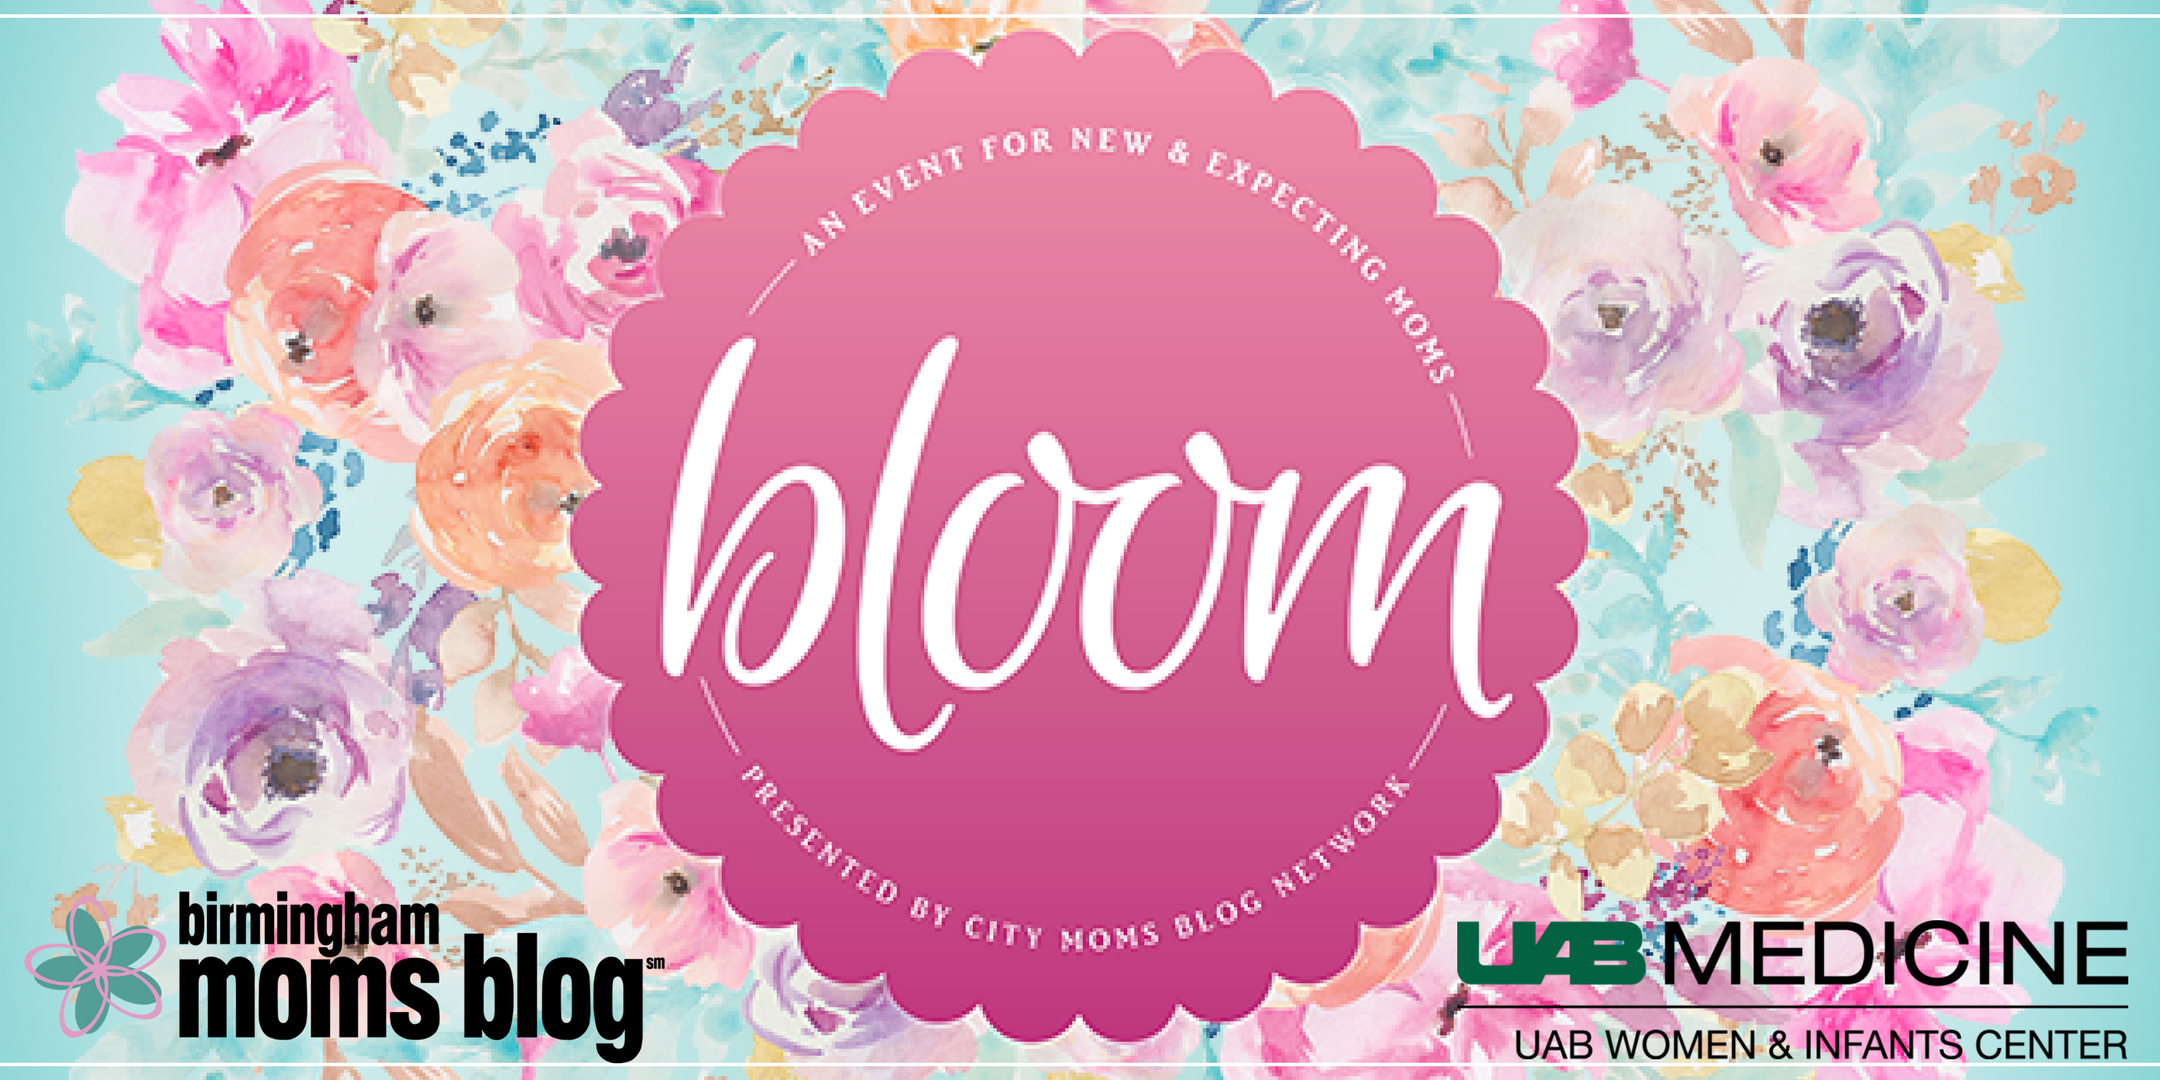 Bloom : An Event for New and Expecting Moms in Birmingham